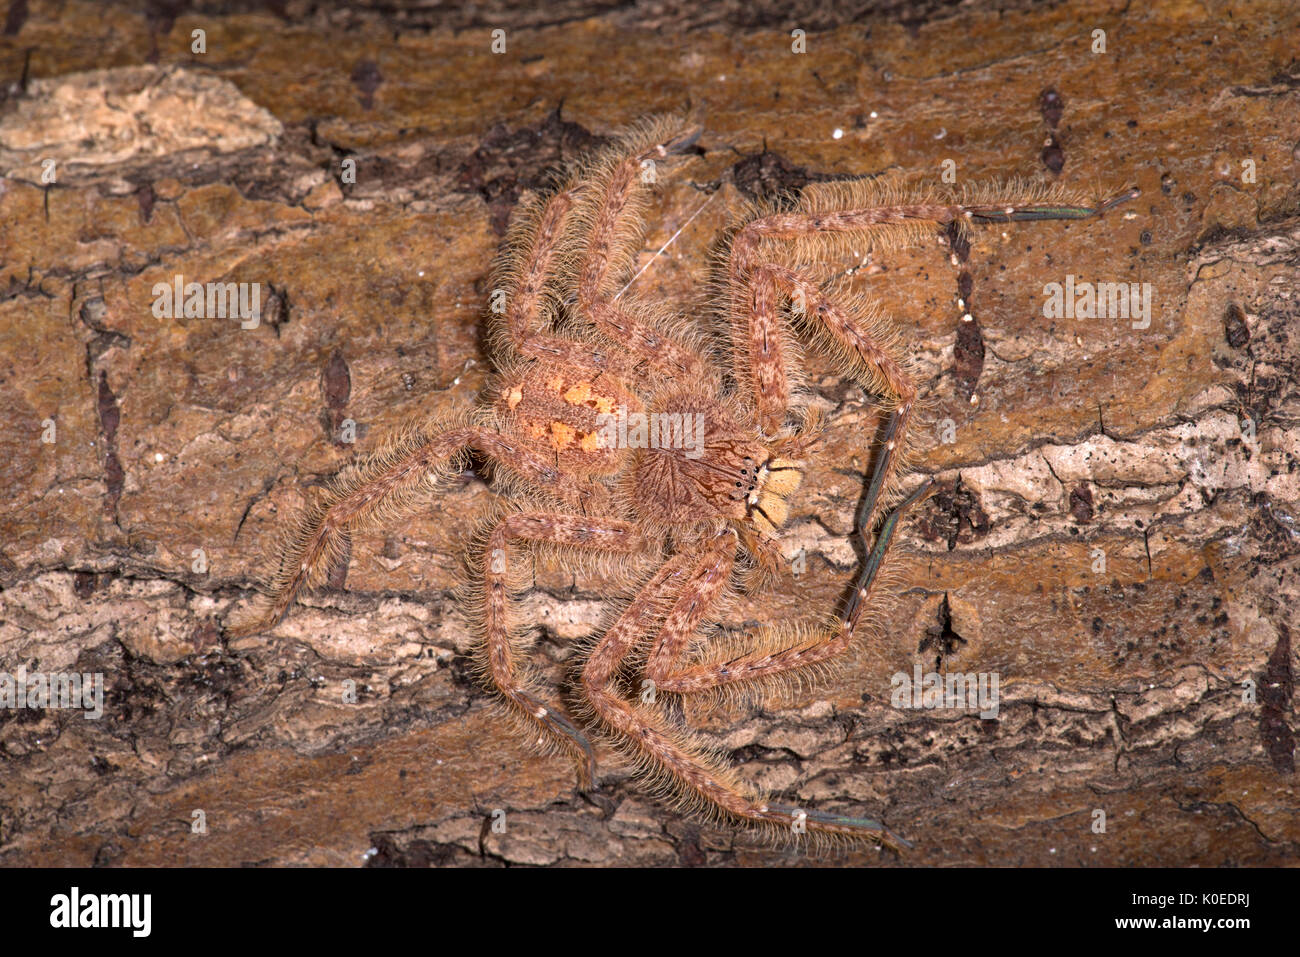 Huntsman Spider, Heteropoda davidbowie, from the Cameron Highlands District in peninsular Malaysia and named in honor of singer David Bowie, reference Stock Photo